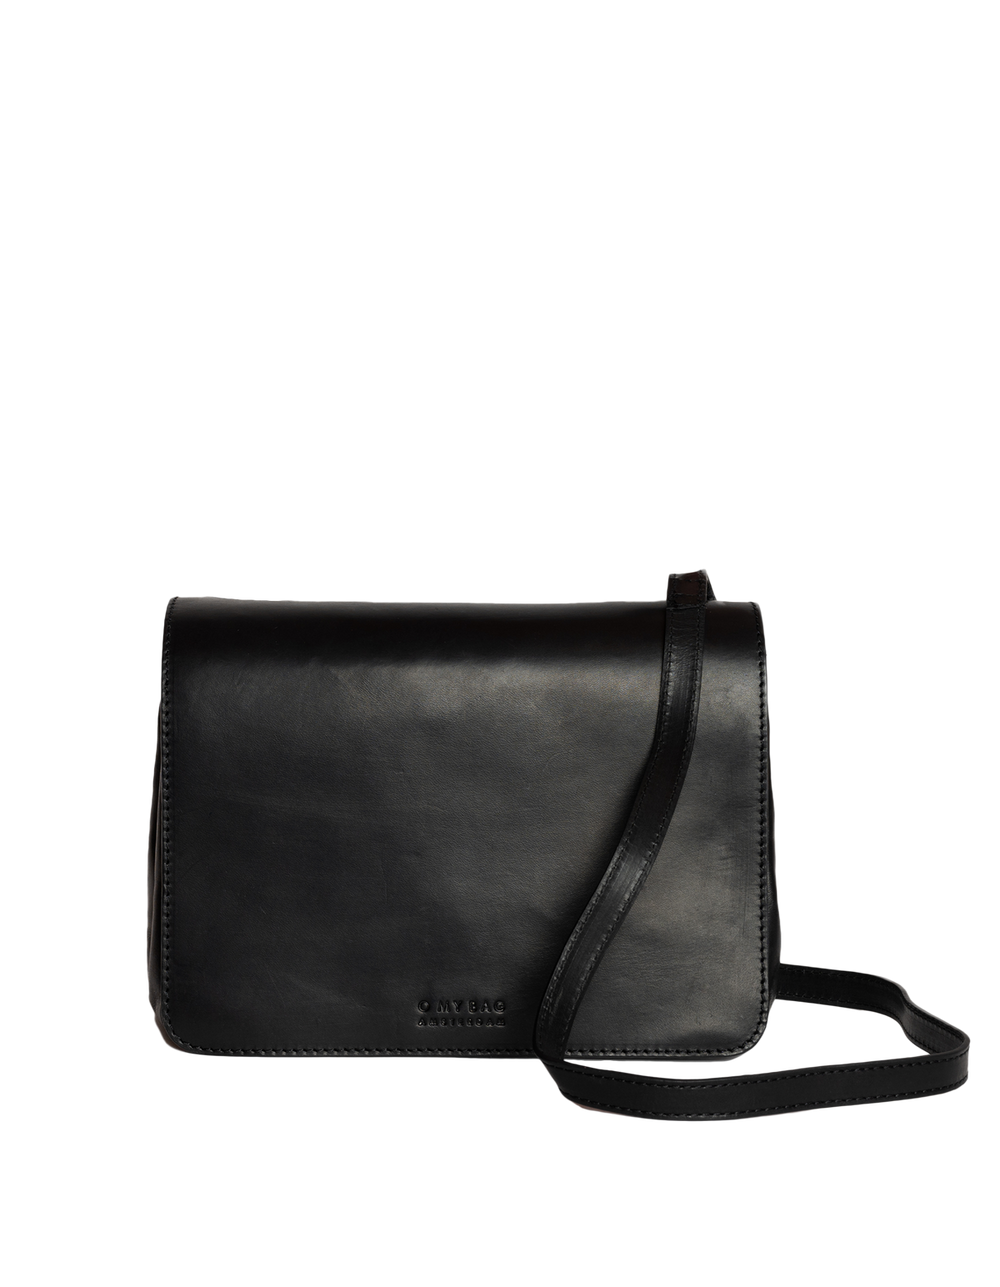 THE LUCY Black Classic Leather Bag